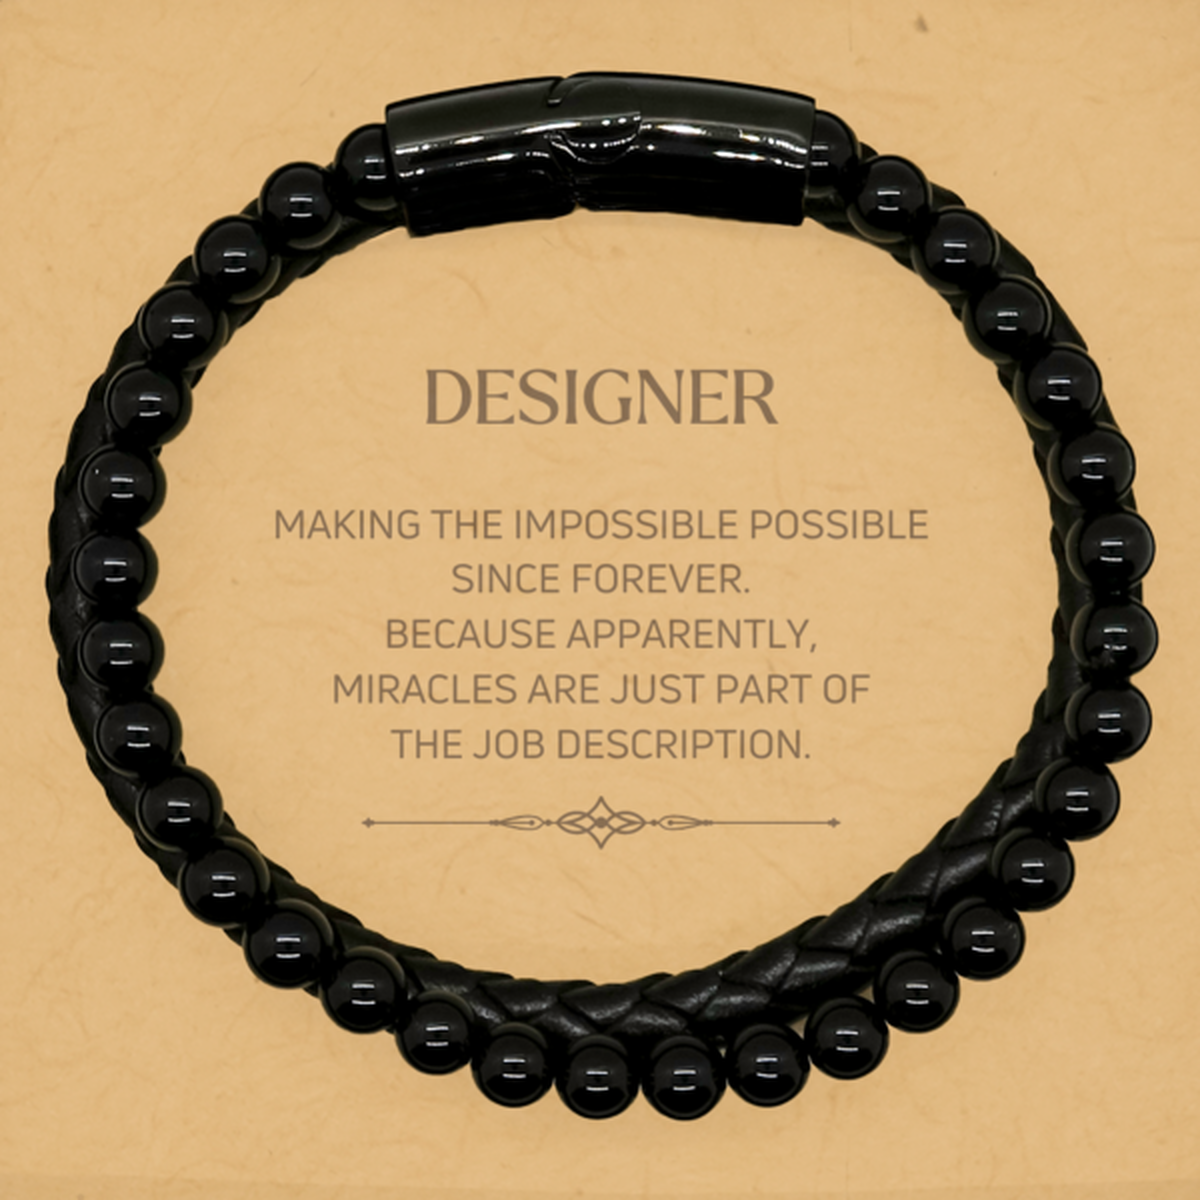 Funny Designer Gifts, Miracles are just part of the job description, Inspirational Birthday Stone Leather Bracelets For Designer, Men, Women, Coworkers, Friends, Boss